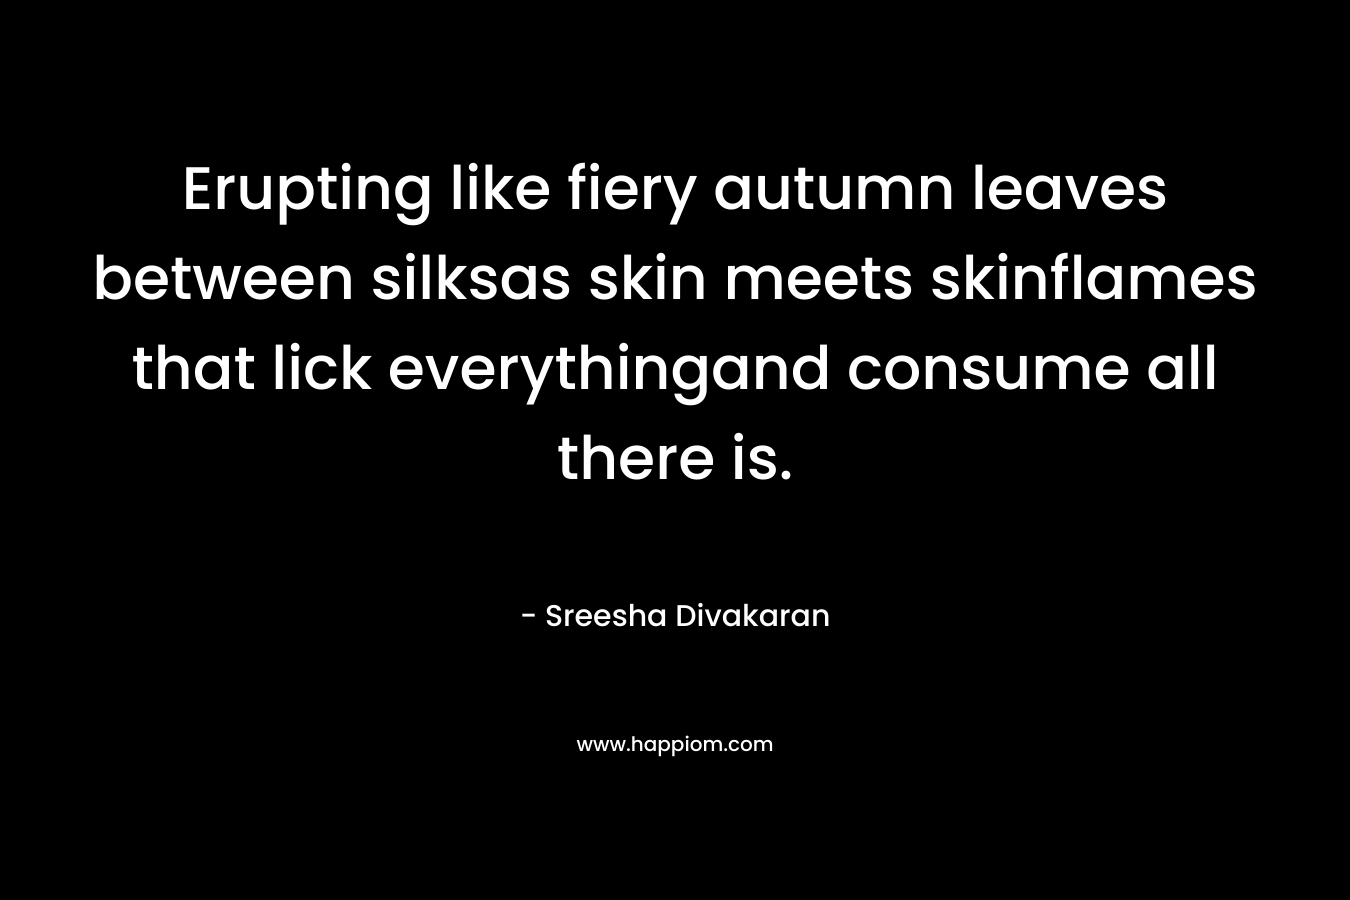 Erupting like fiery autumn leaves between silksas skin meets skinflames that lick everythingand consume all there is. – Sreesha Divakaran